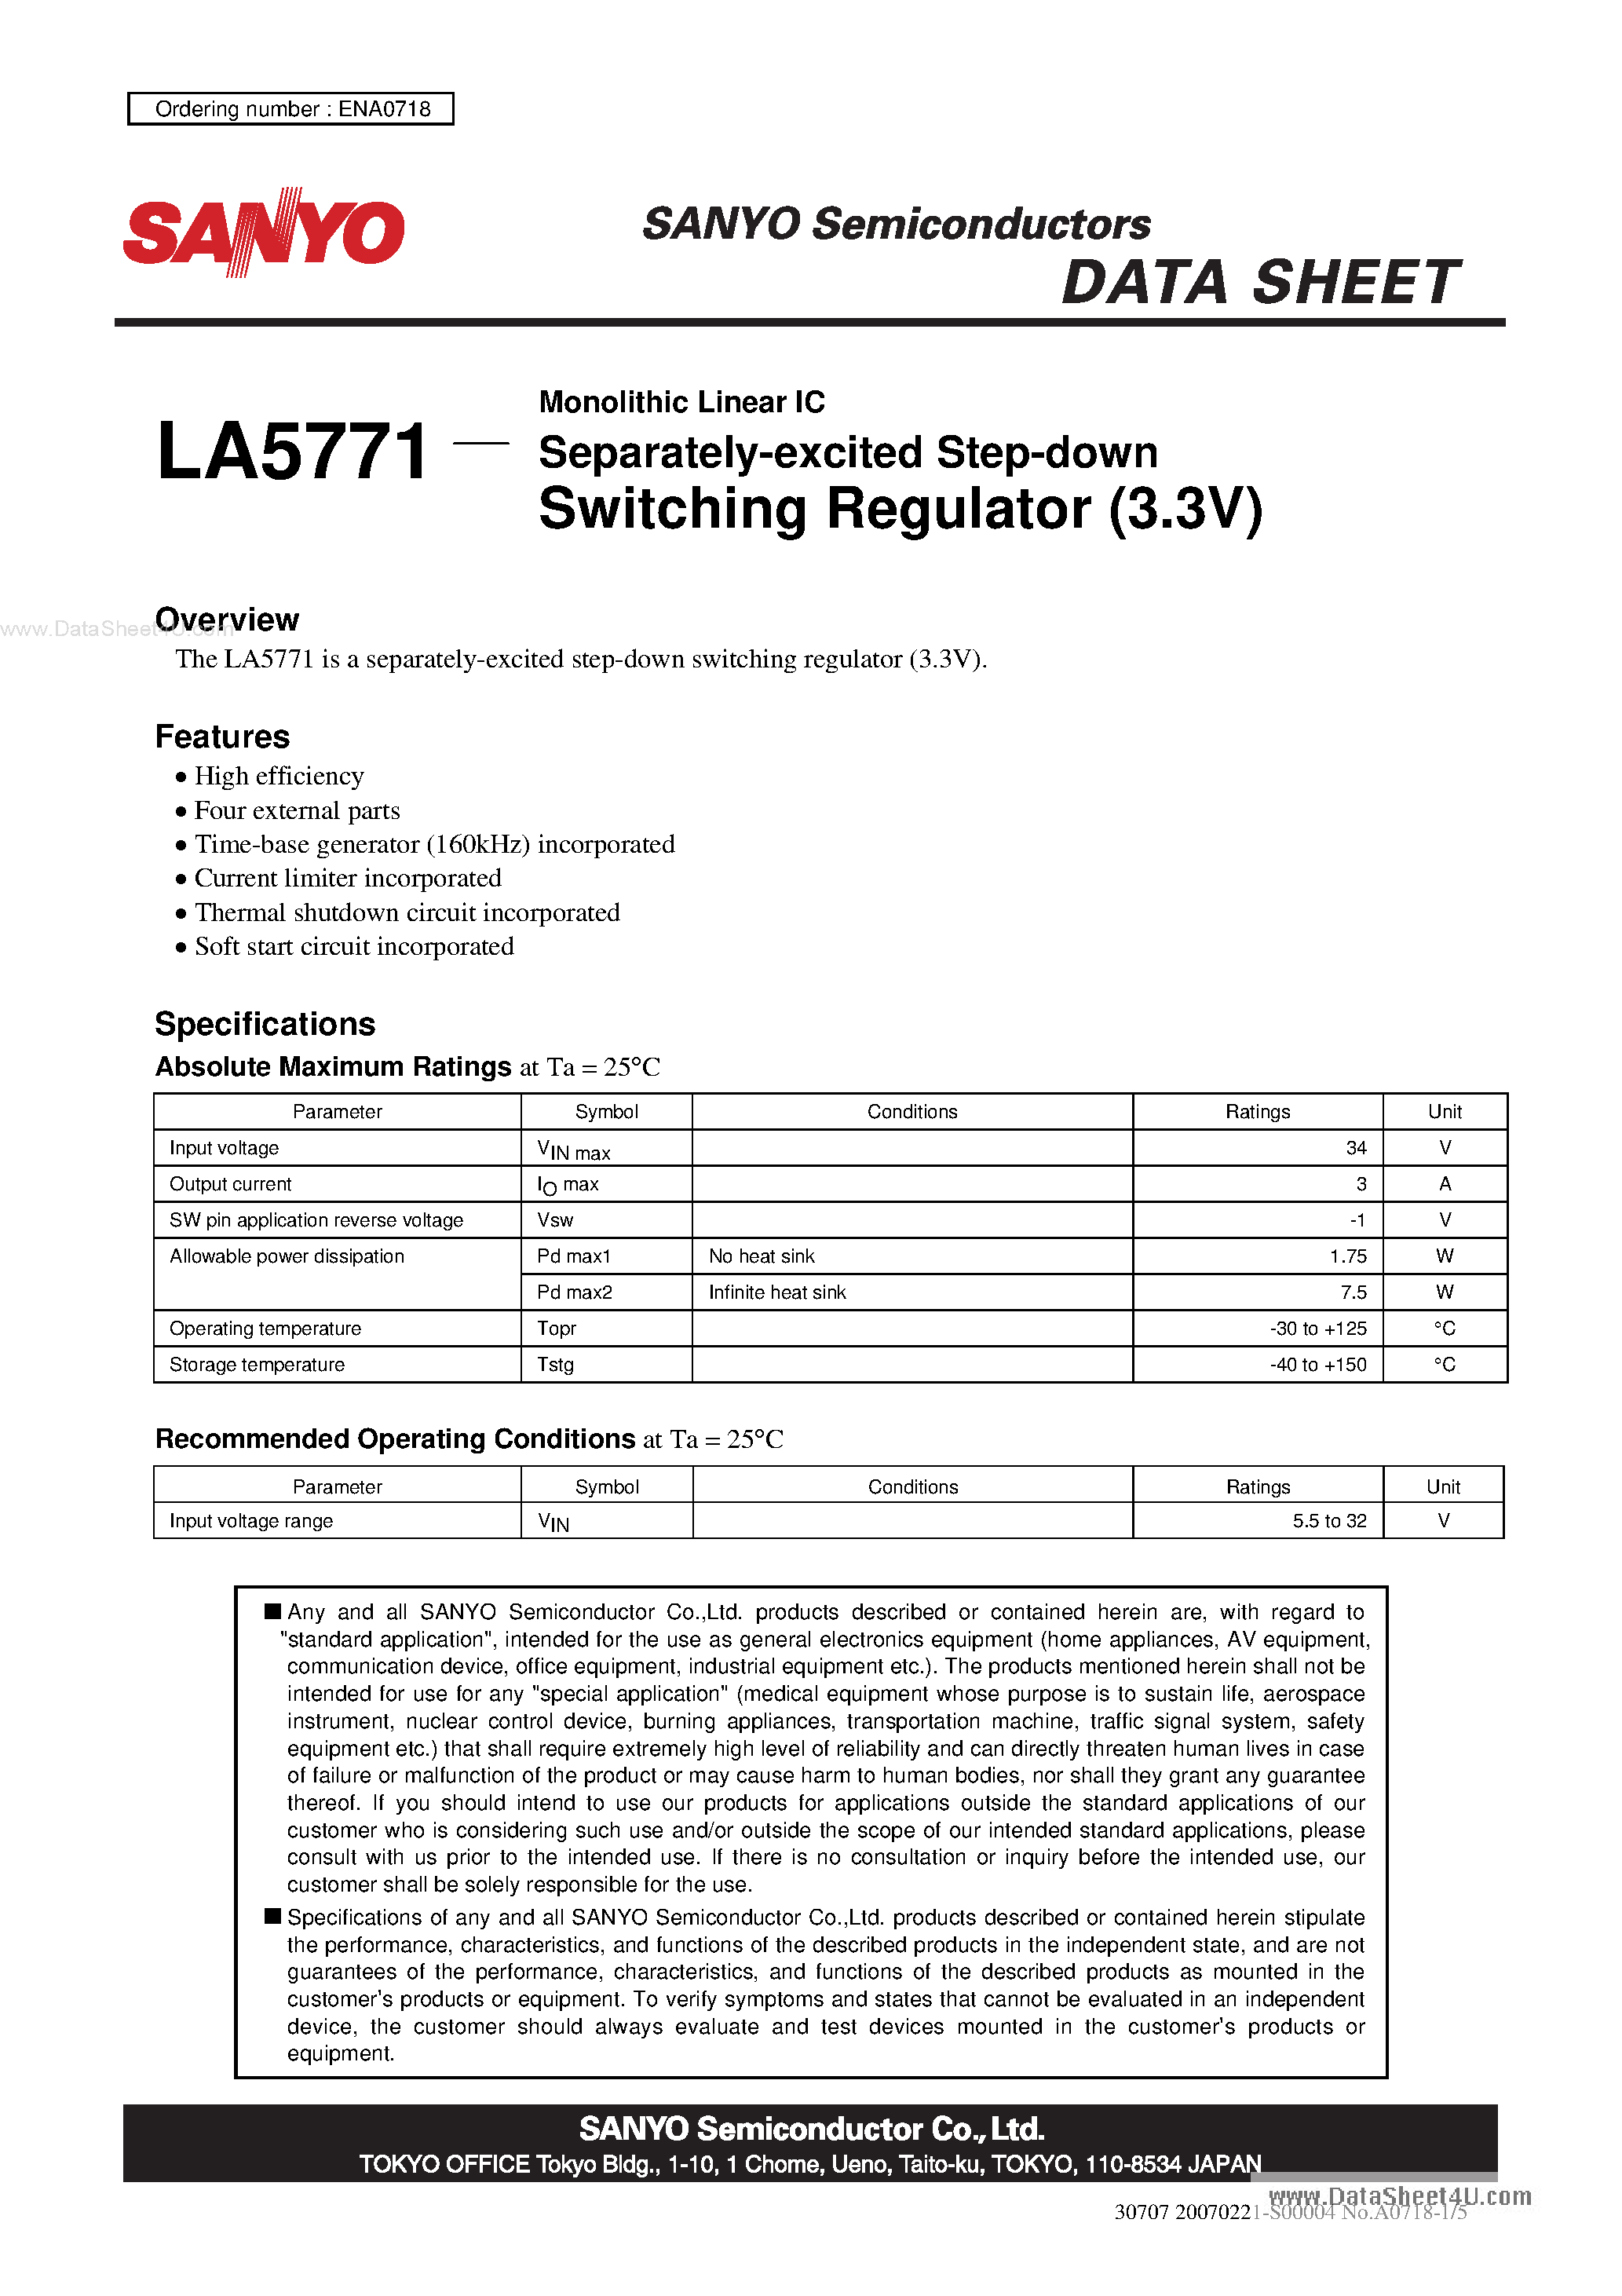 Даташит LA5771 - Monolithic Linear IC Separately-Excited Step-Down Switching Regulator страница 1